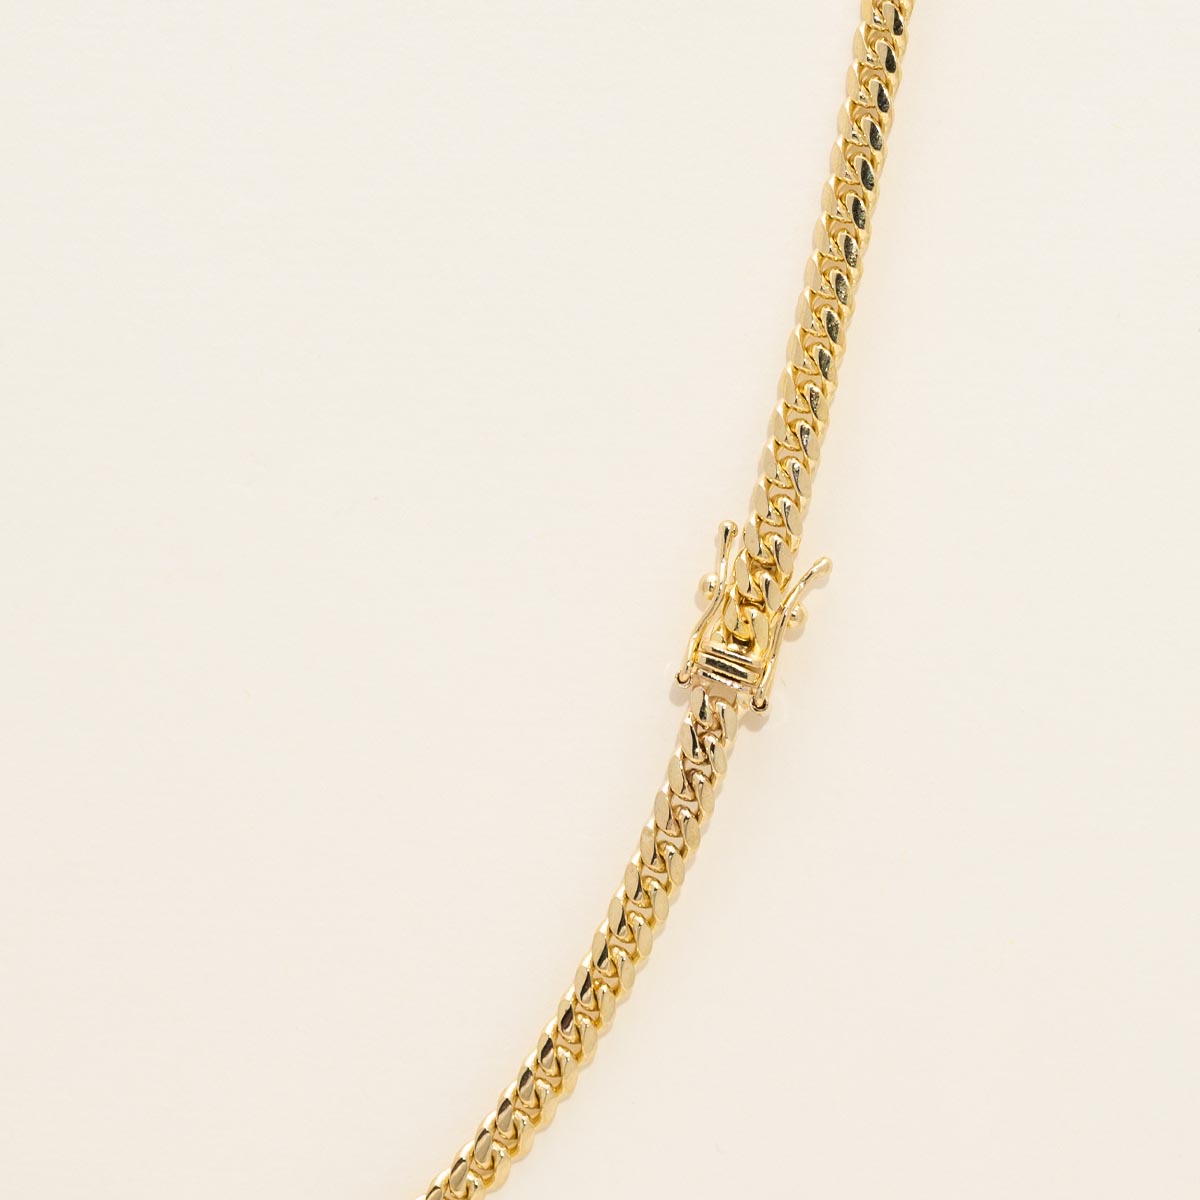 Maimi Cuban Chain in 10kt Yellow Gold (18 inches and 3.9mm wide)